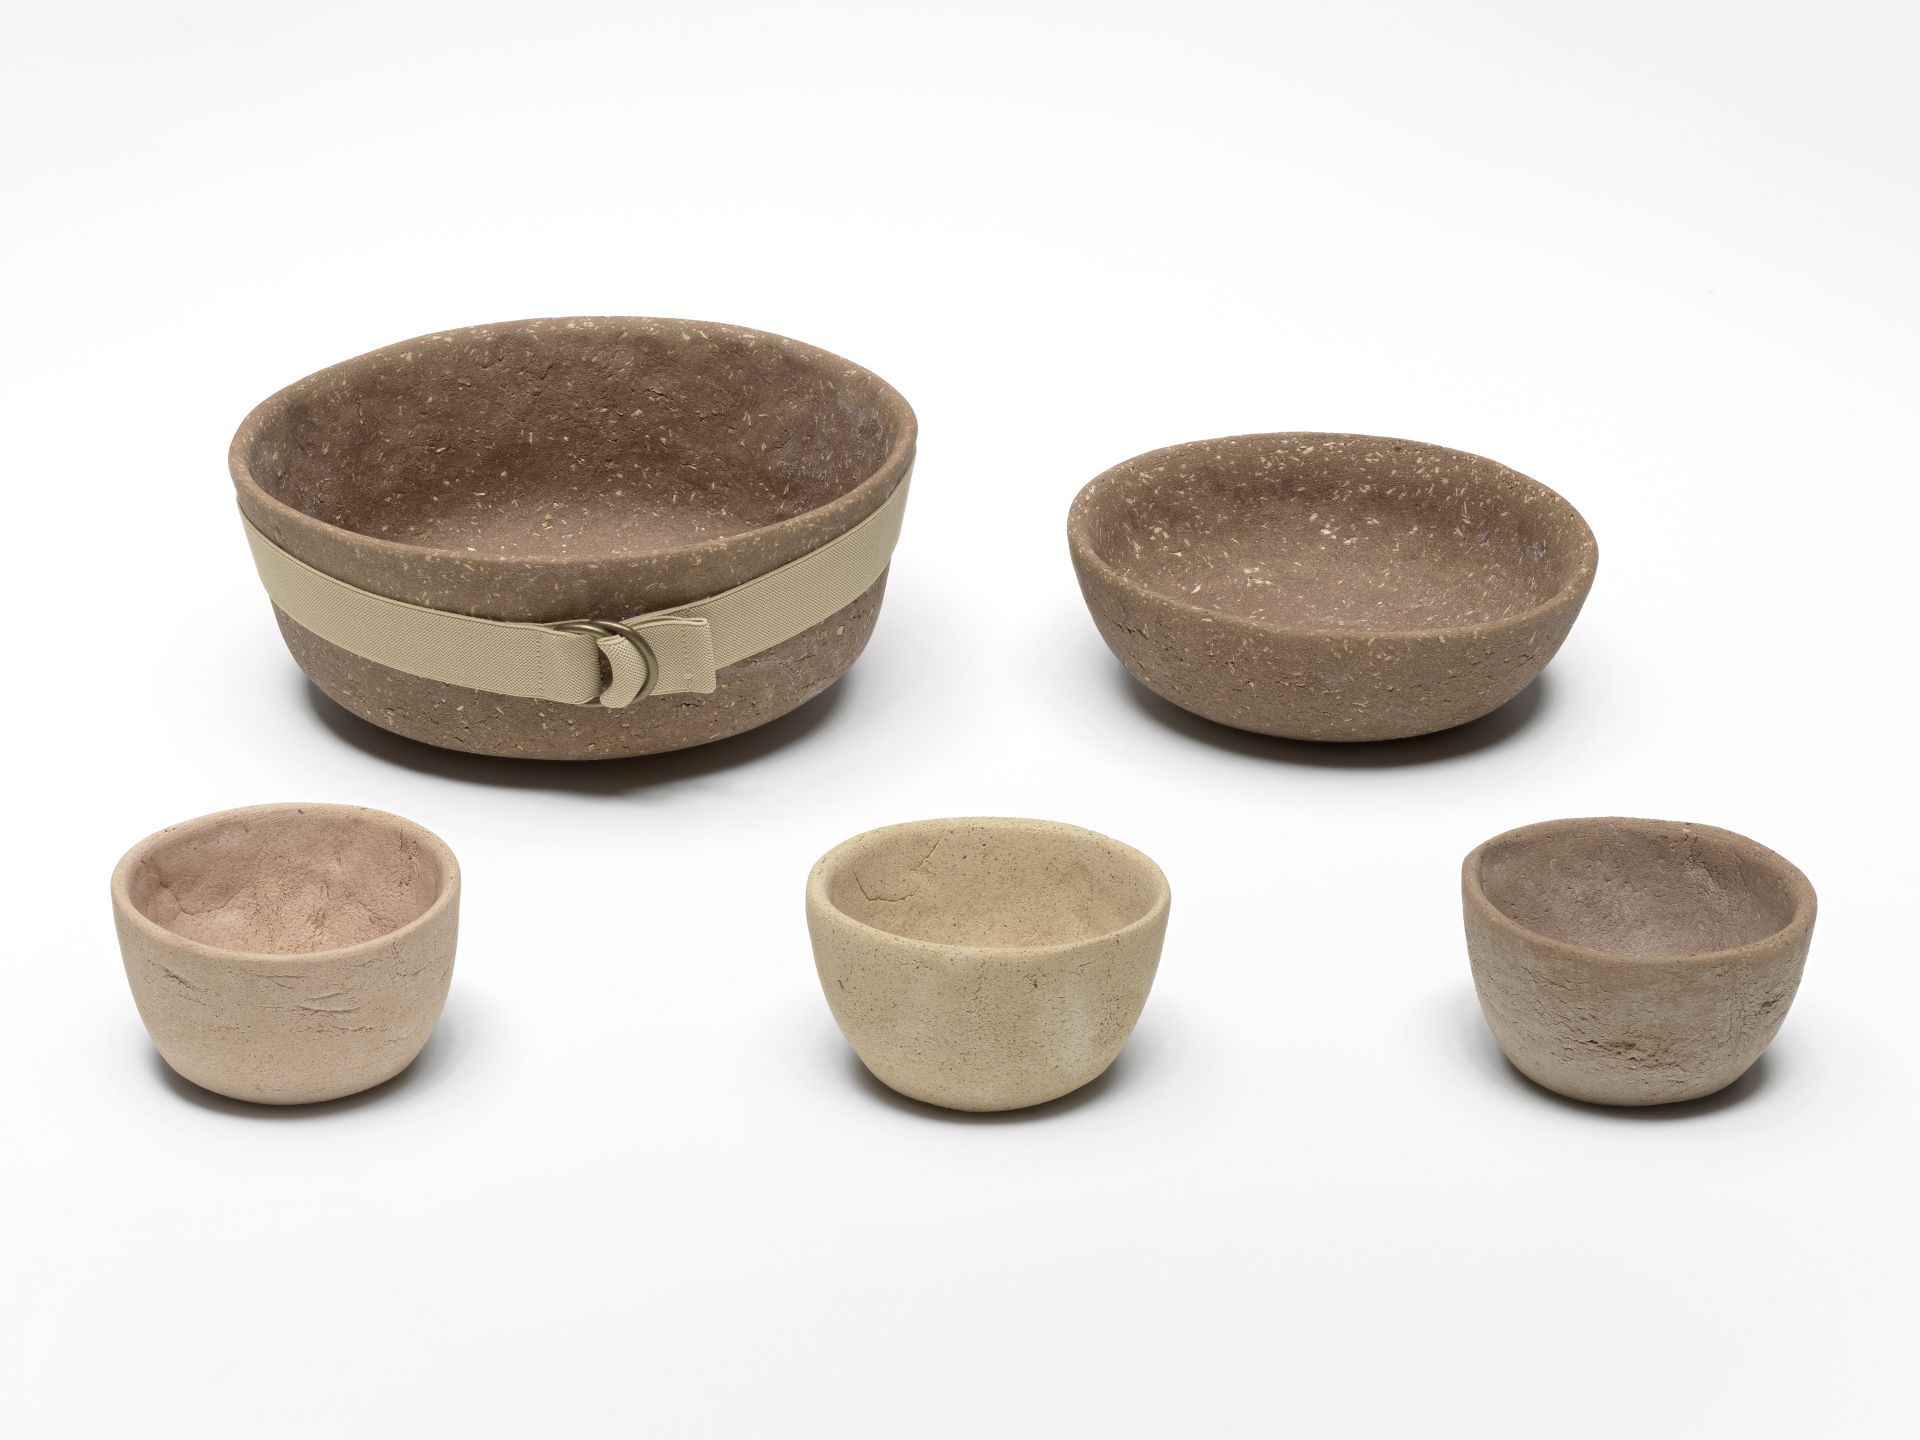 View of five bowls made of biomaterial baked at low temperature, consisting of flour, organic waste and natural limestone